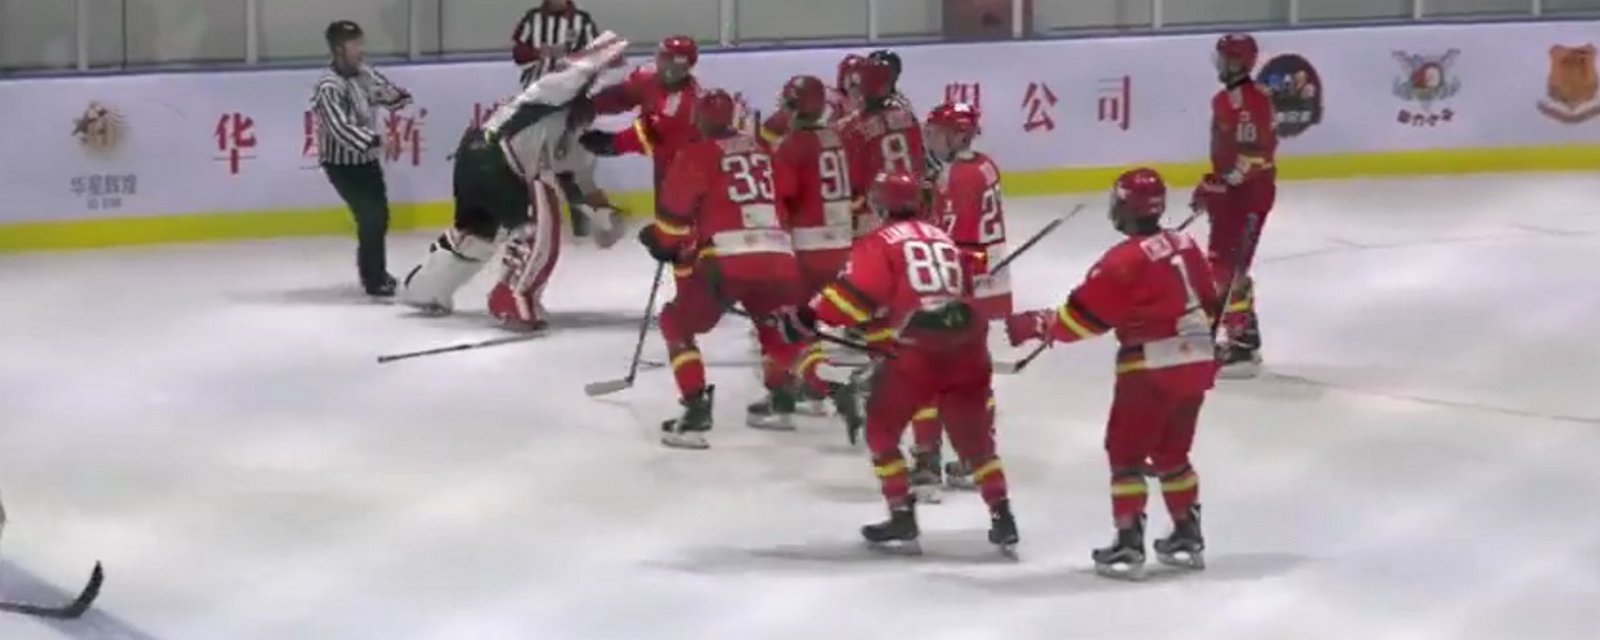 Goalie gets angry and starts a bench clearing brawl!